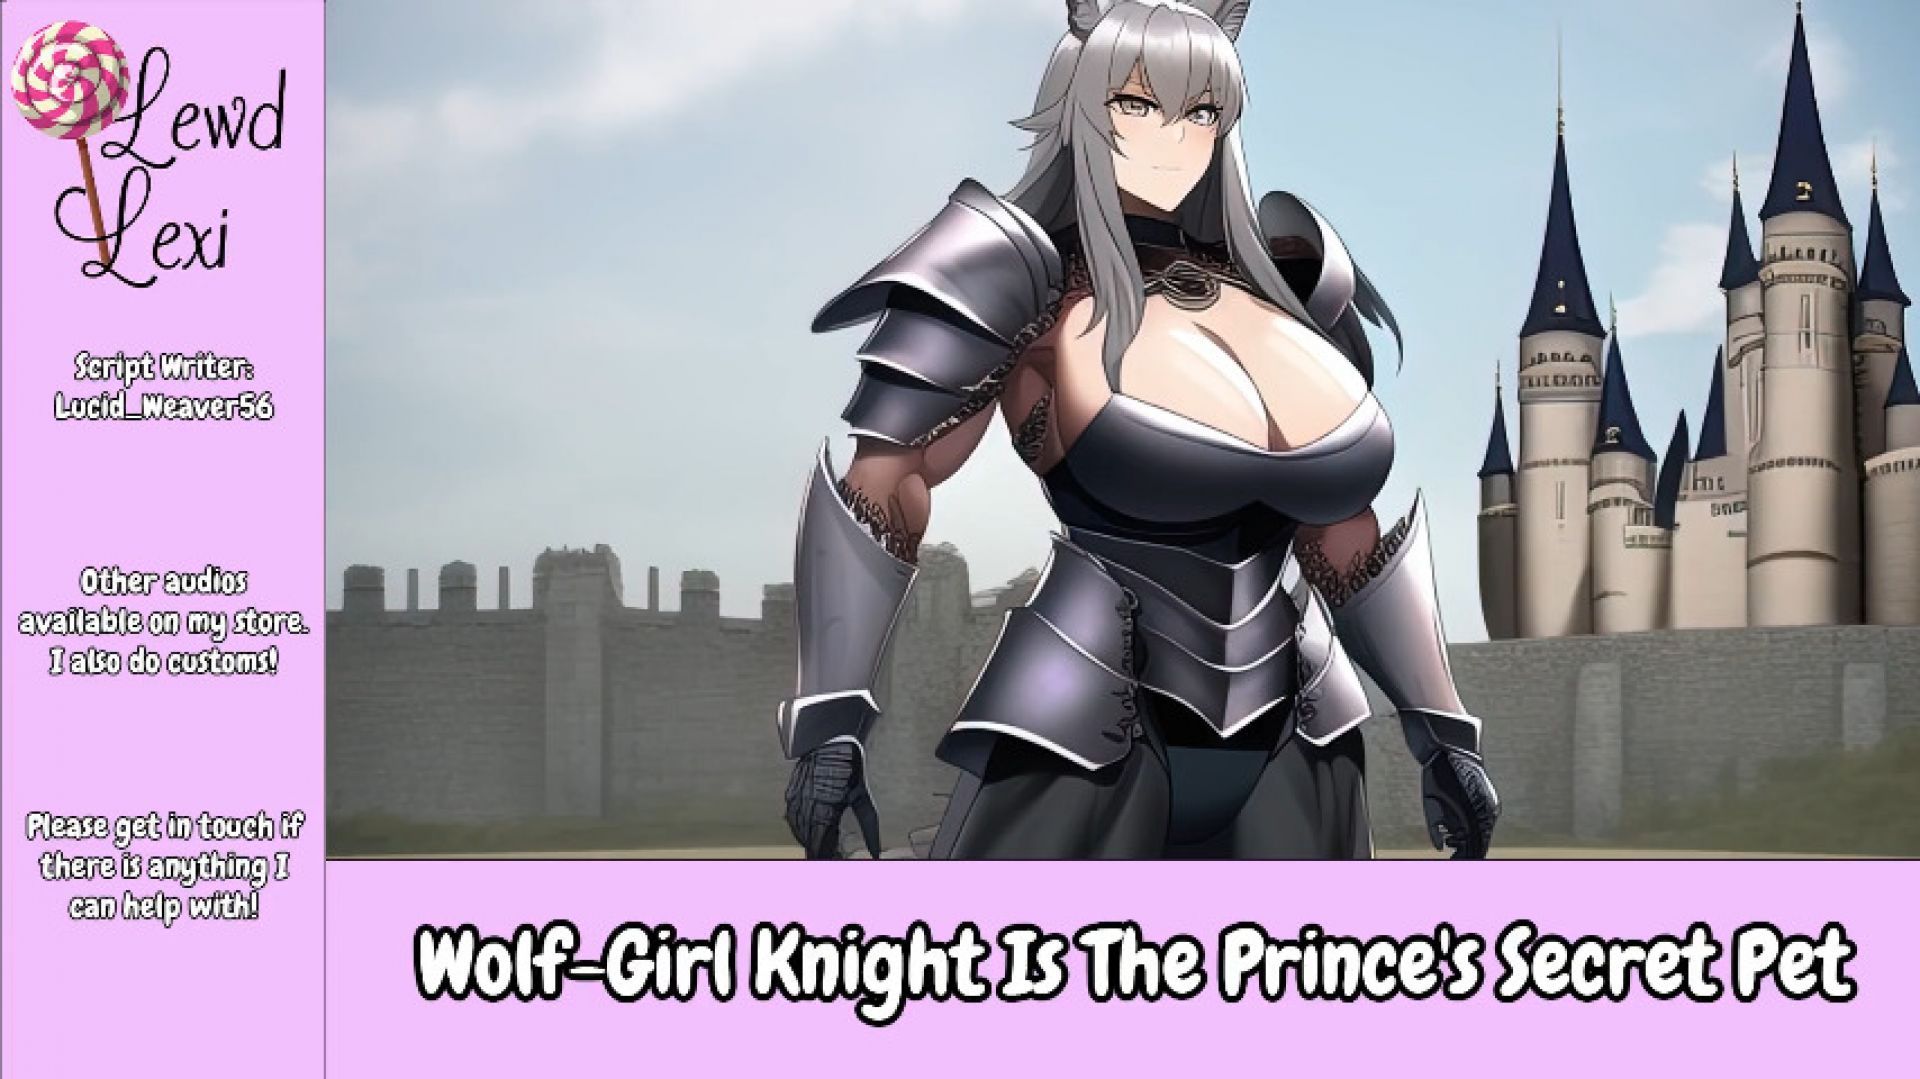 Wolf-Girl Knight Is The Prince's Secret Pet Audio